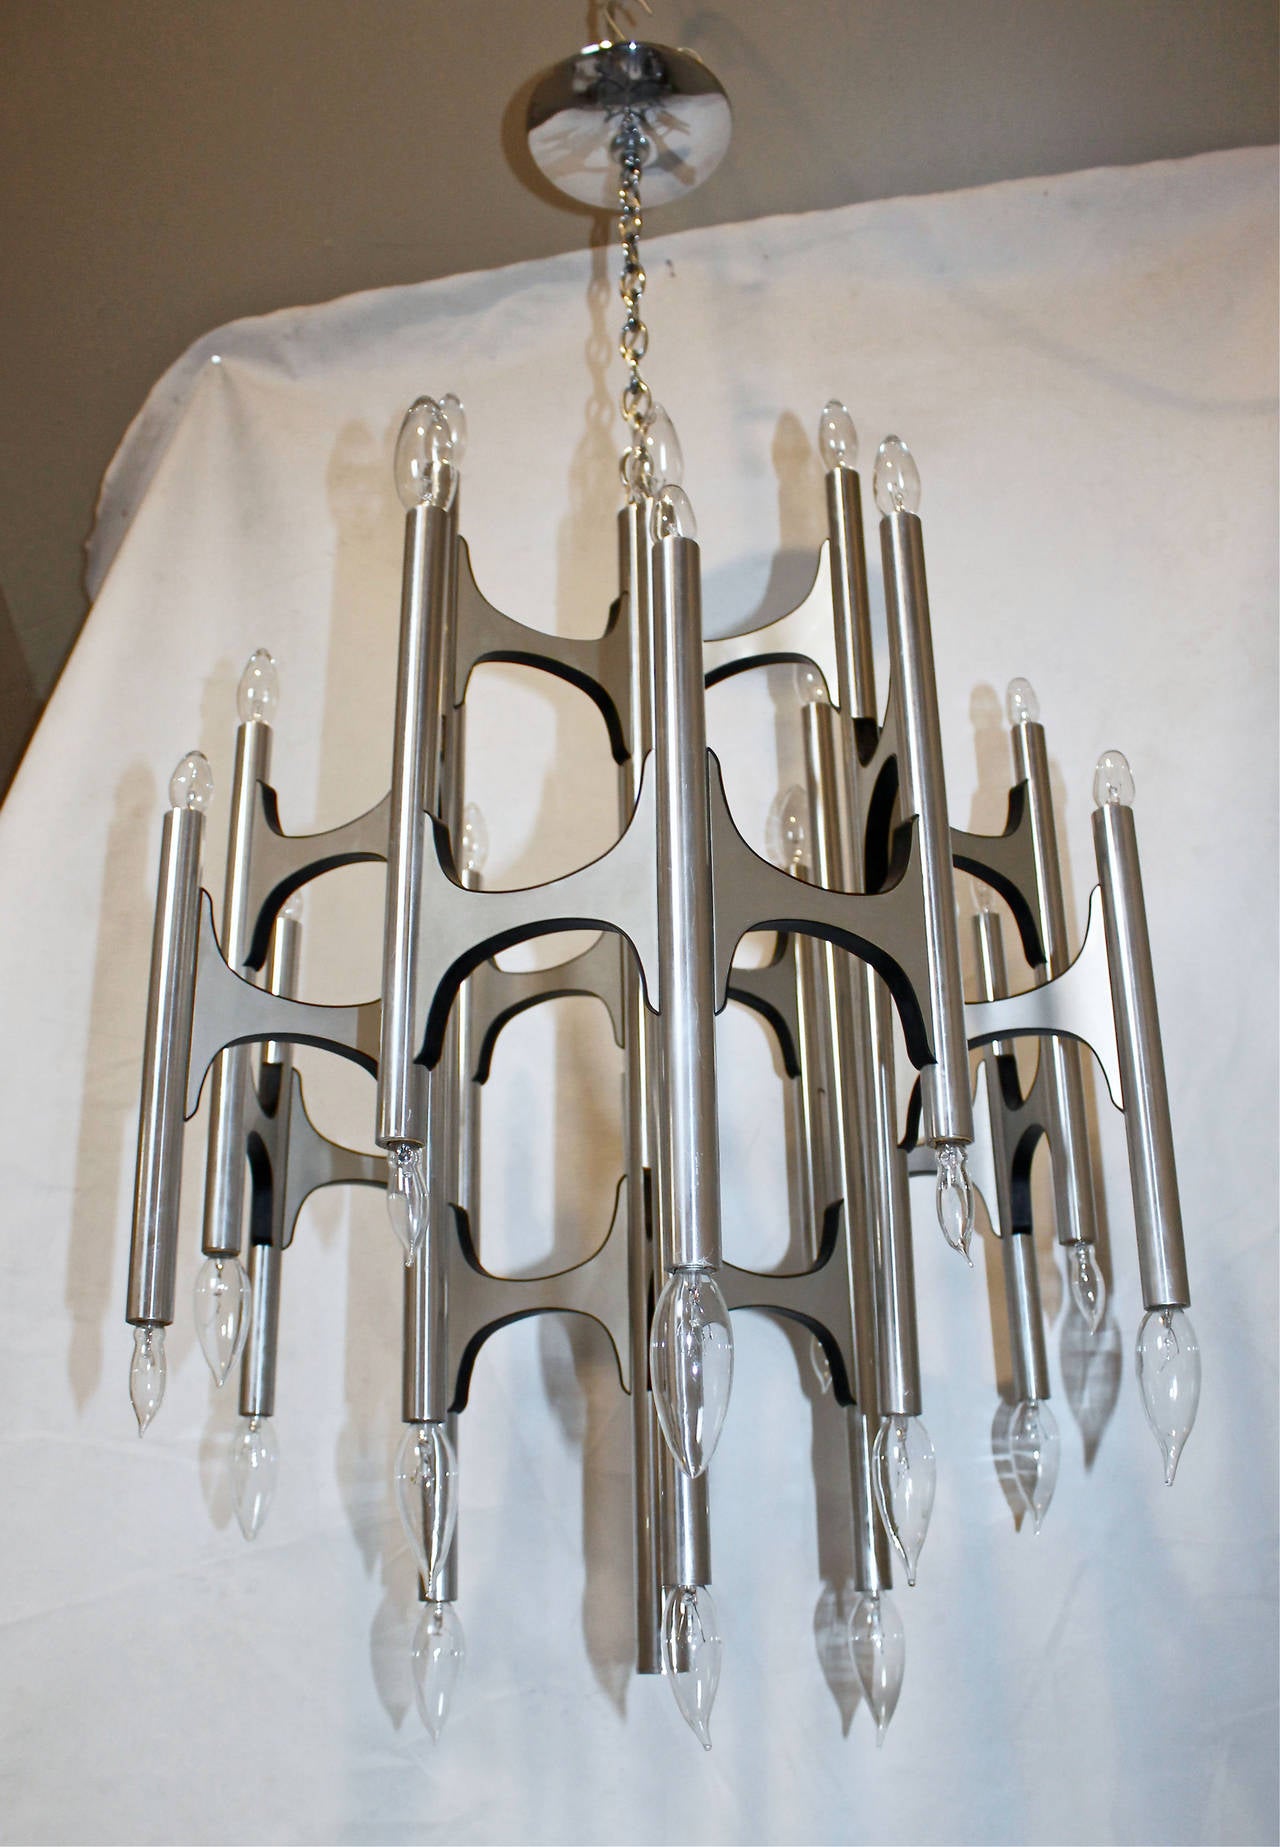 Large sculptural 36-light aluminium chandelier designed by Gaetano Sciolari for Lightolier. Provides both upward and downward lighting. Overall height with chain and ceiling cap 42